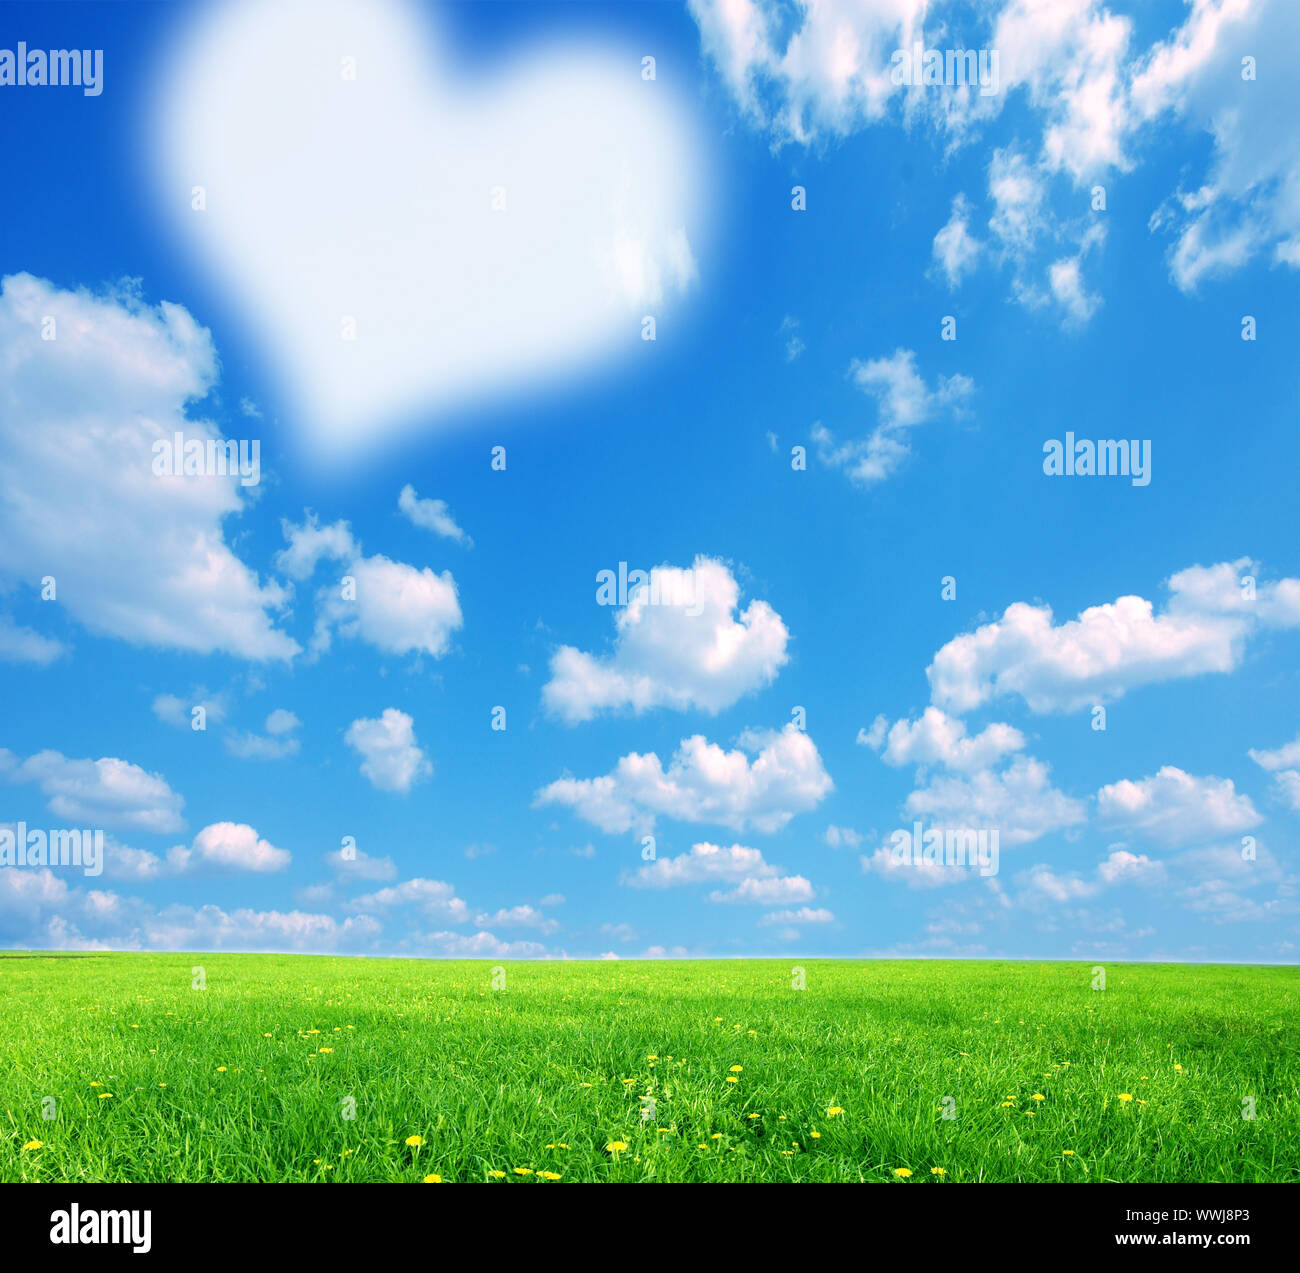 Love nature background, with big white symbolic heart on sky Stock ...